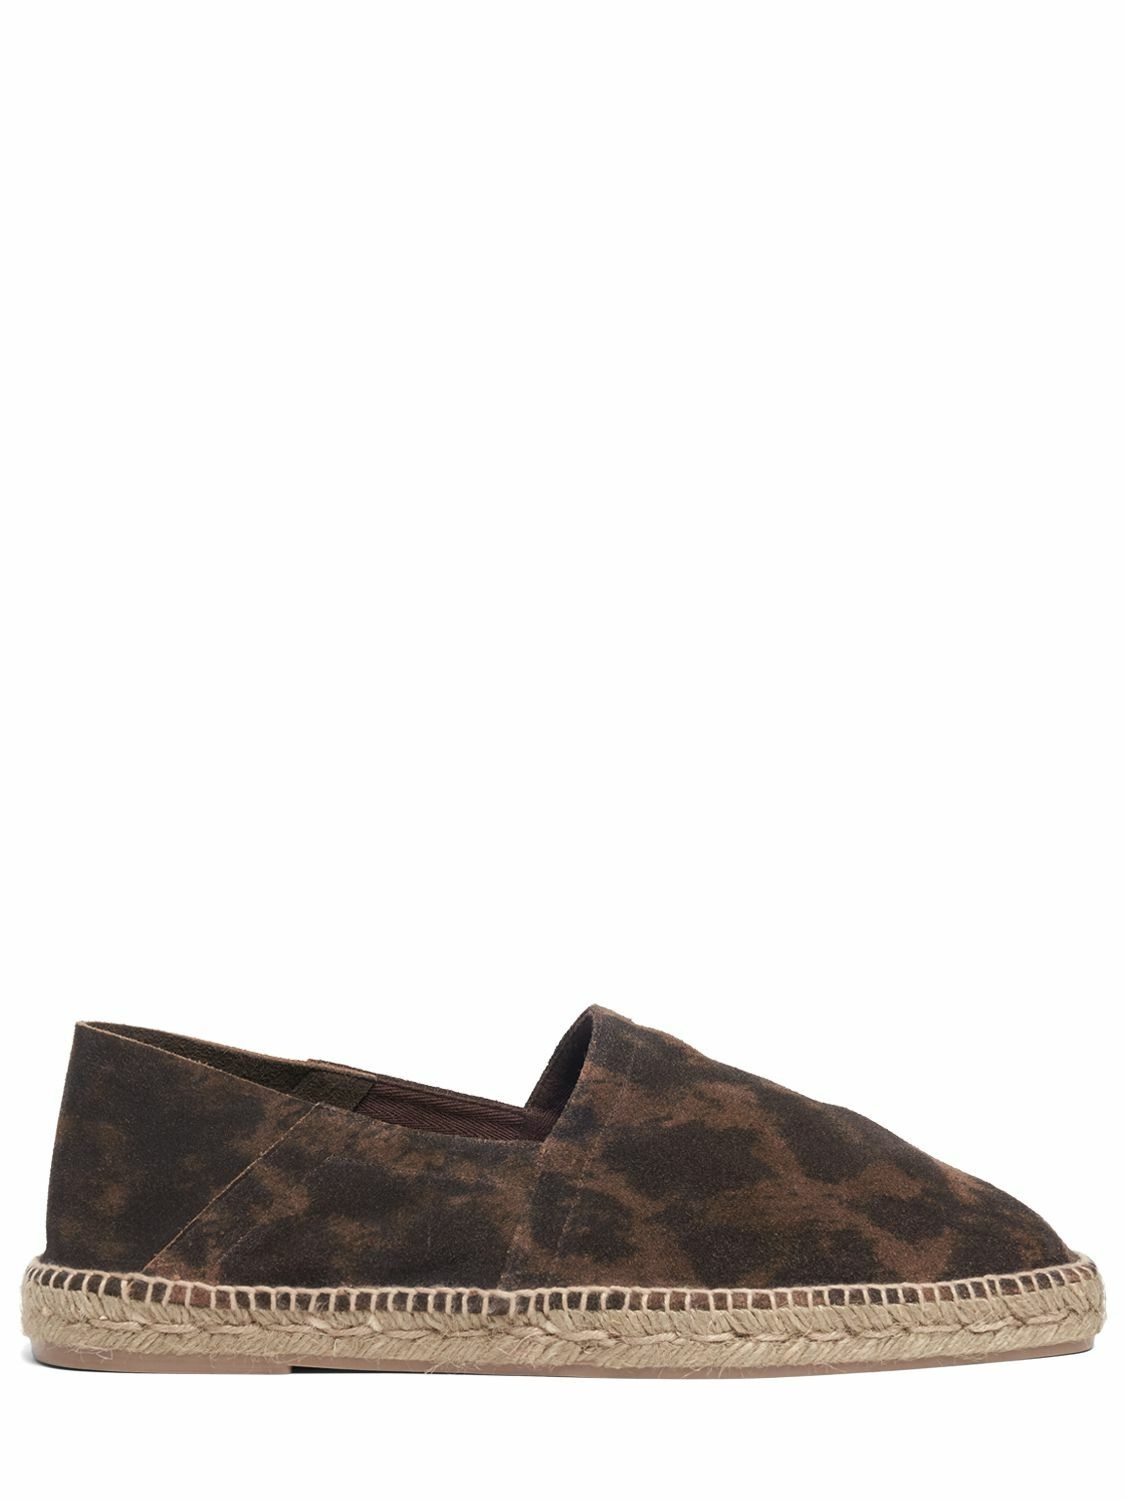 Photo: TOM FORD - Cheetah Printed Suede Loafers